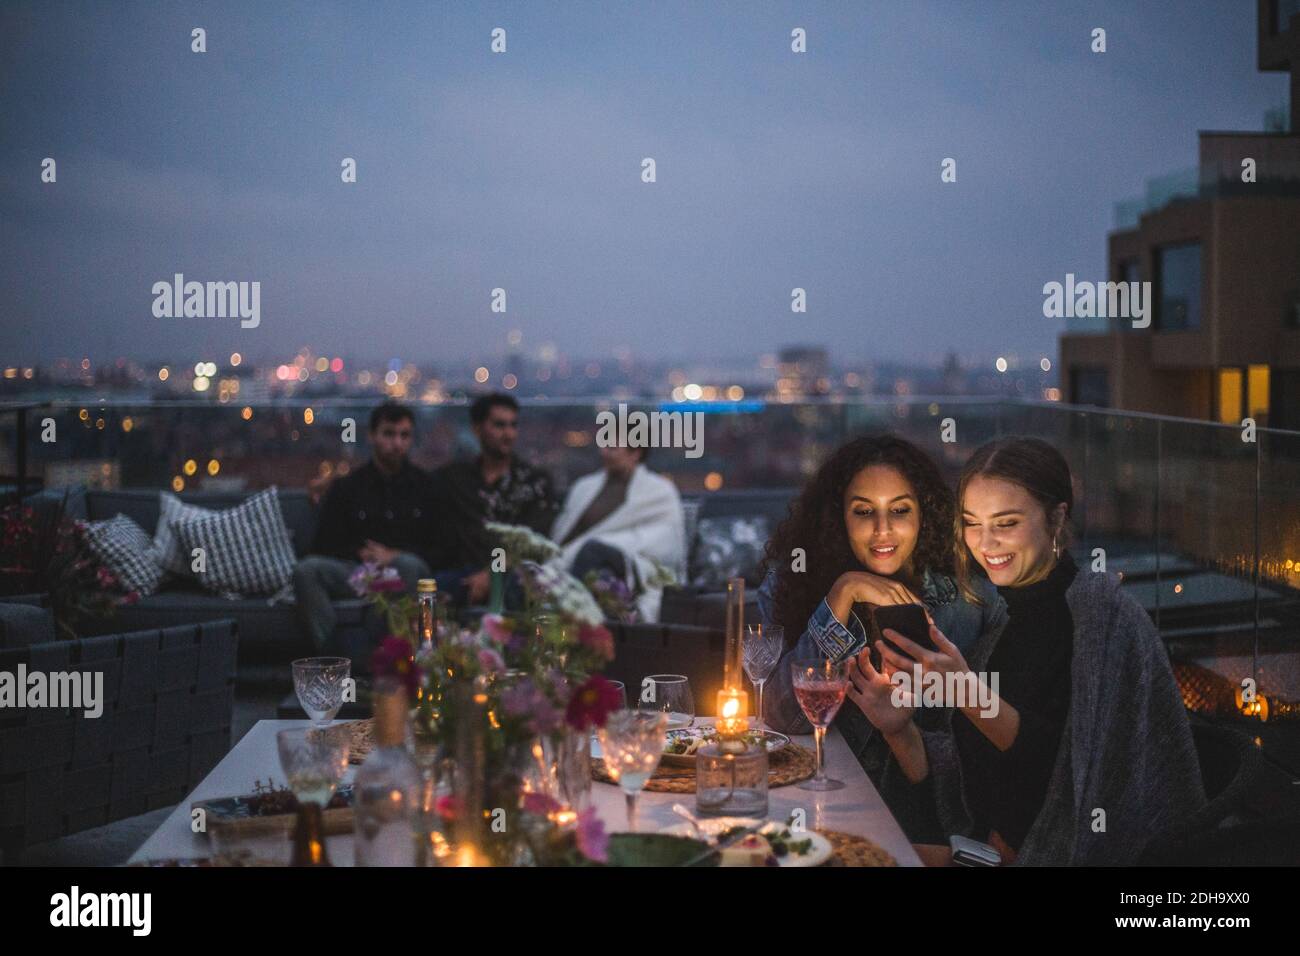 Smiling woman showing smart phone to female while friends sitting in background during social gathering on building terr Stock Photo